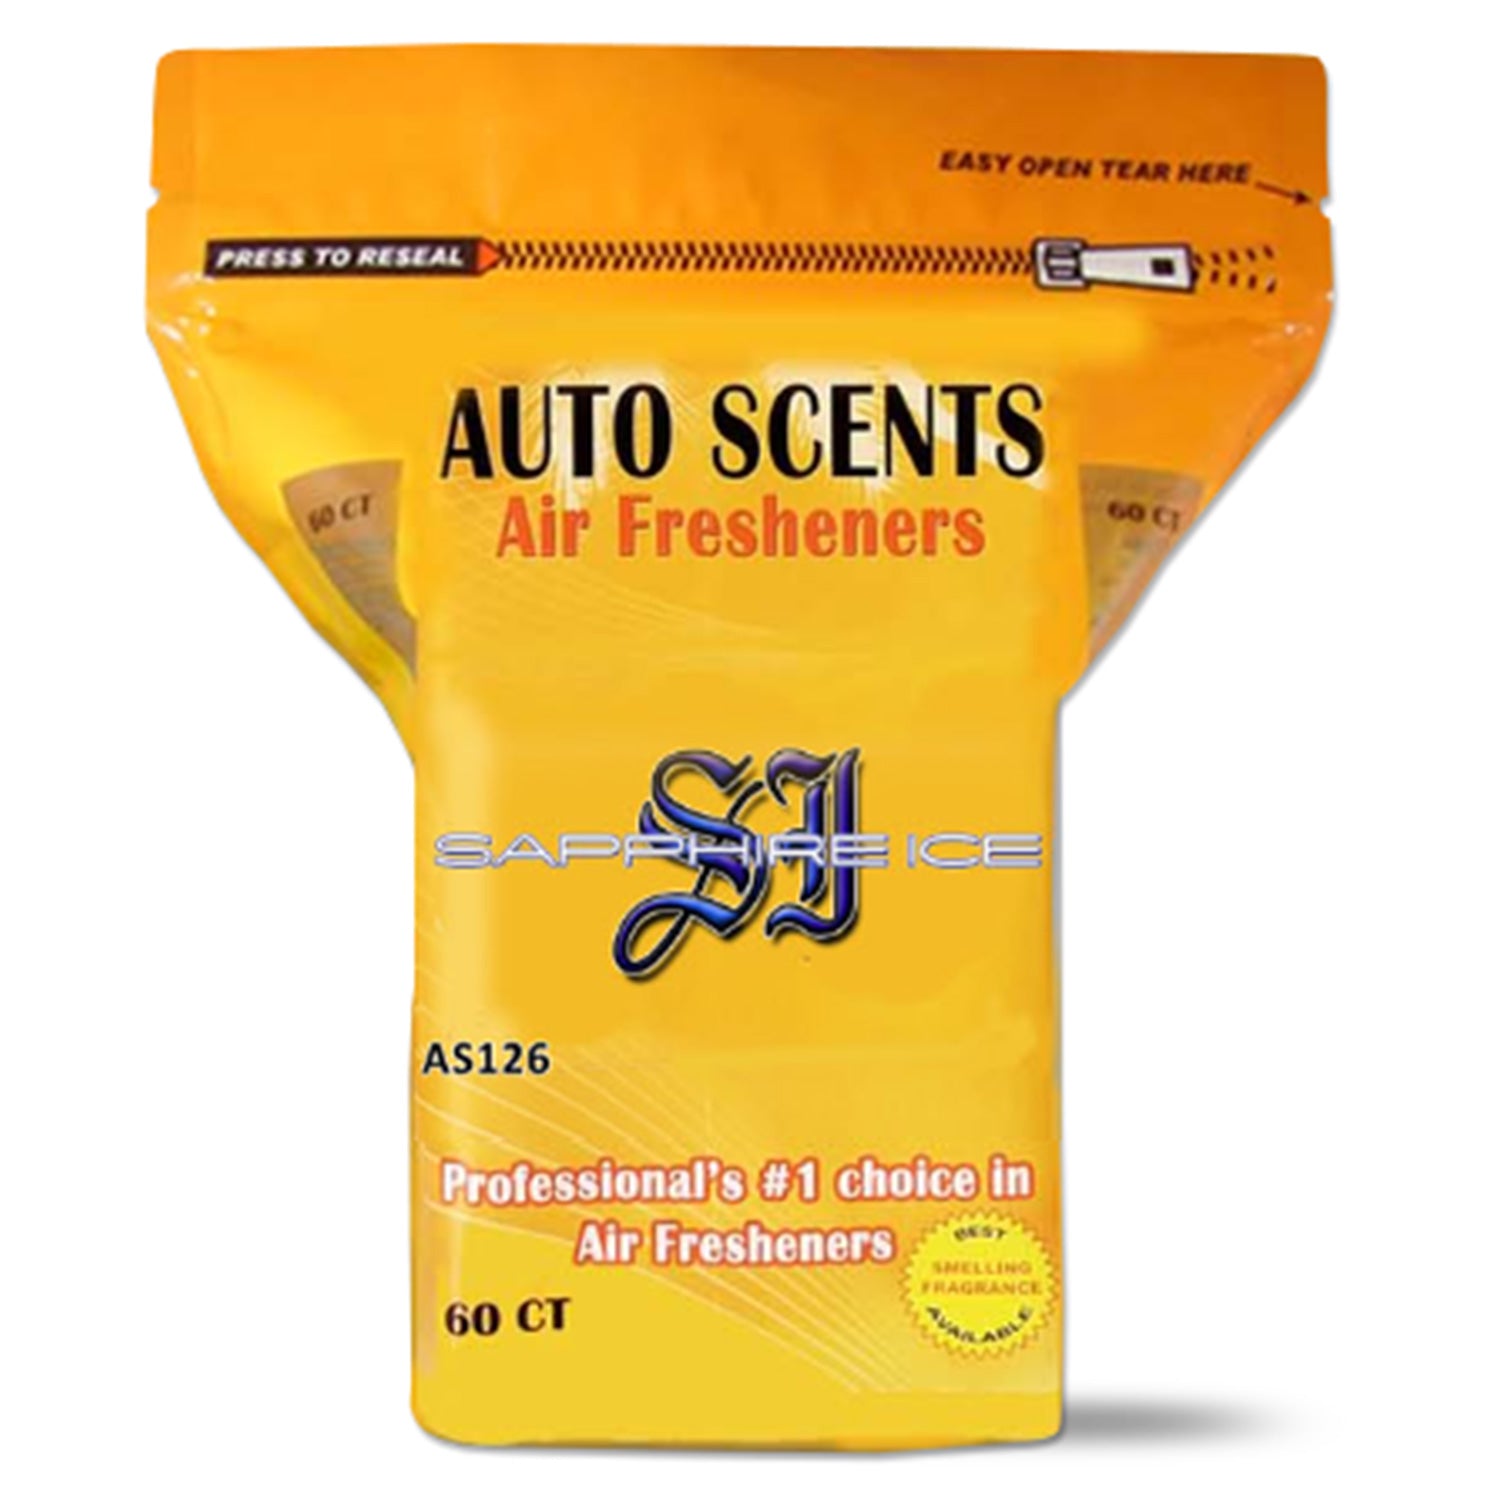 Autoscents-air-freshener-wafers-60-count-bag-sapphire-ice